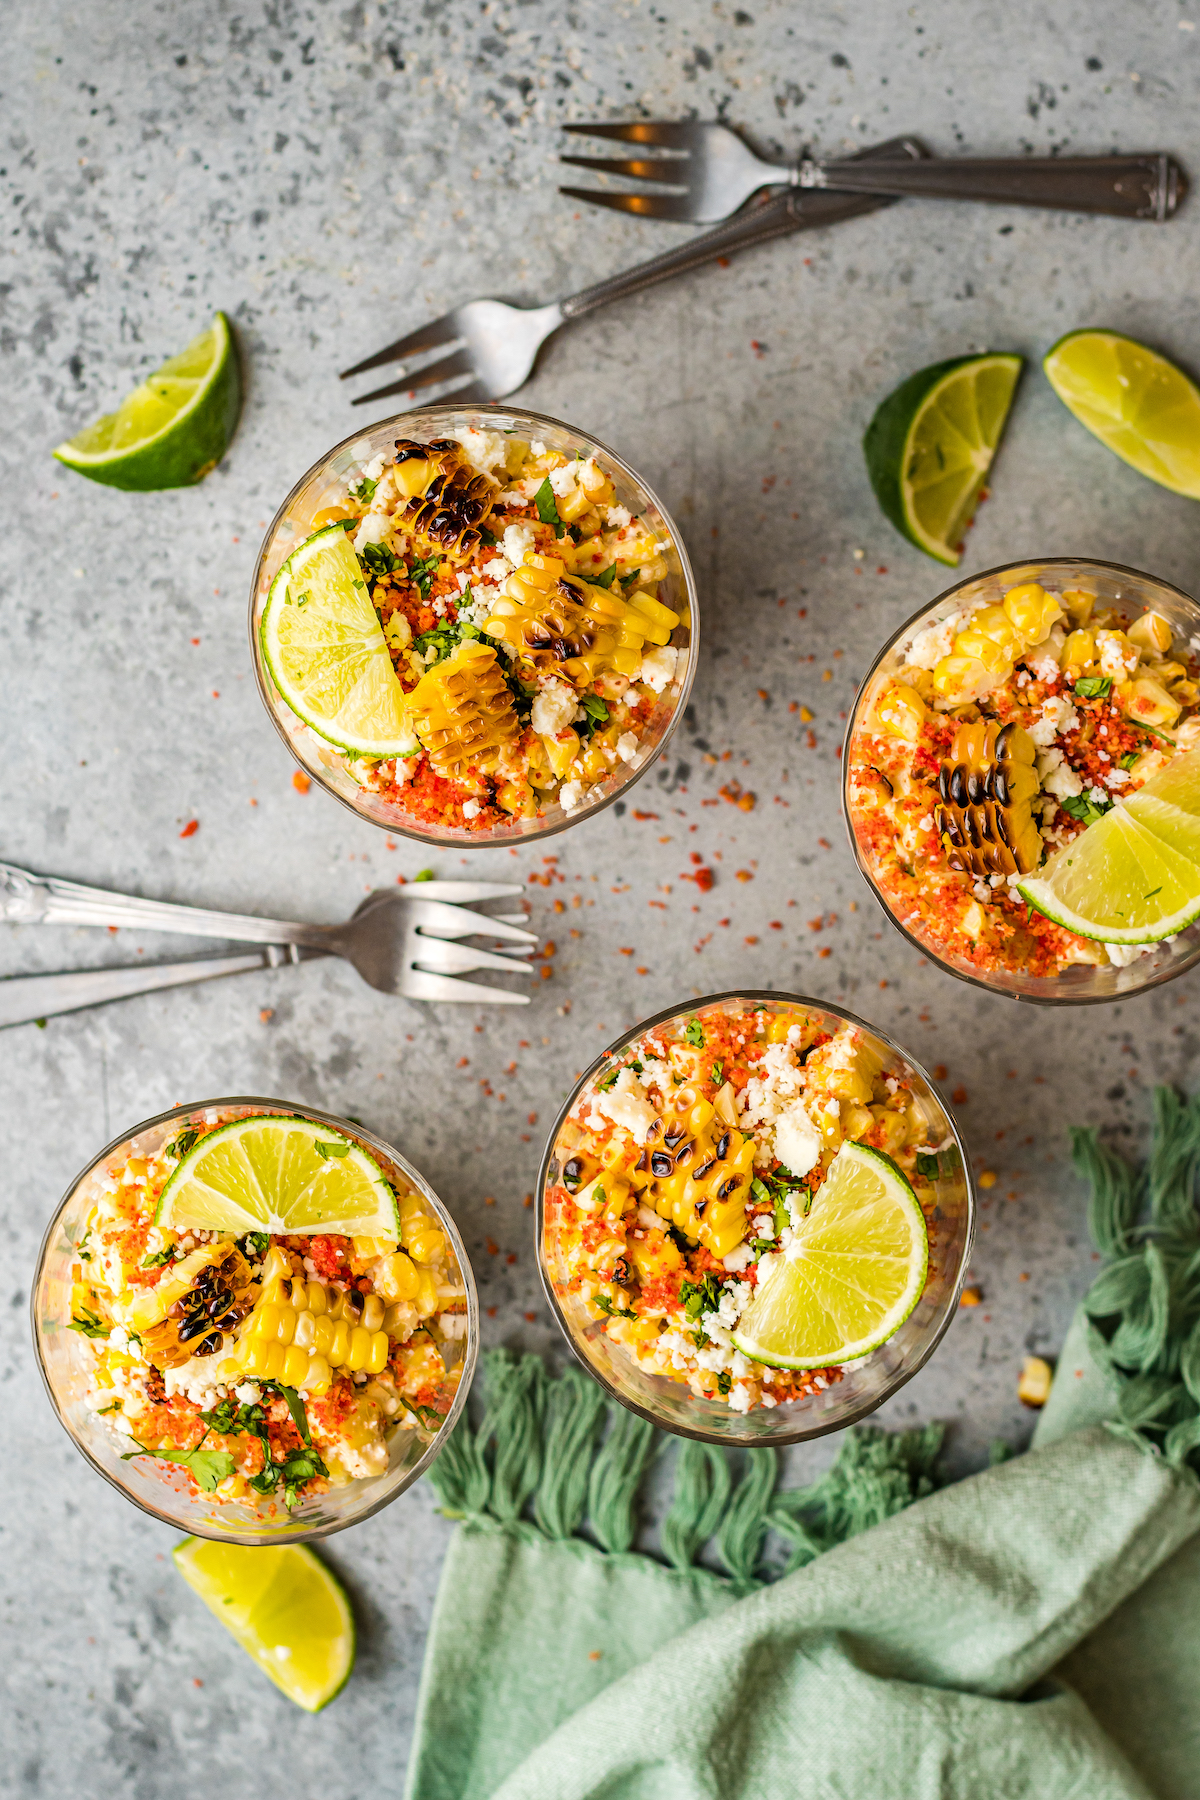 Small cups of Mexican corn salad topped with lime wedges and other toppings.